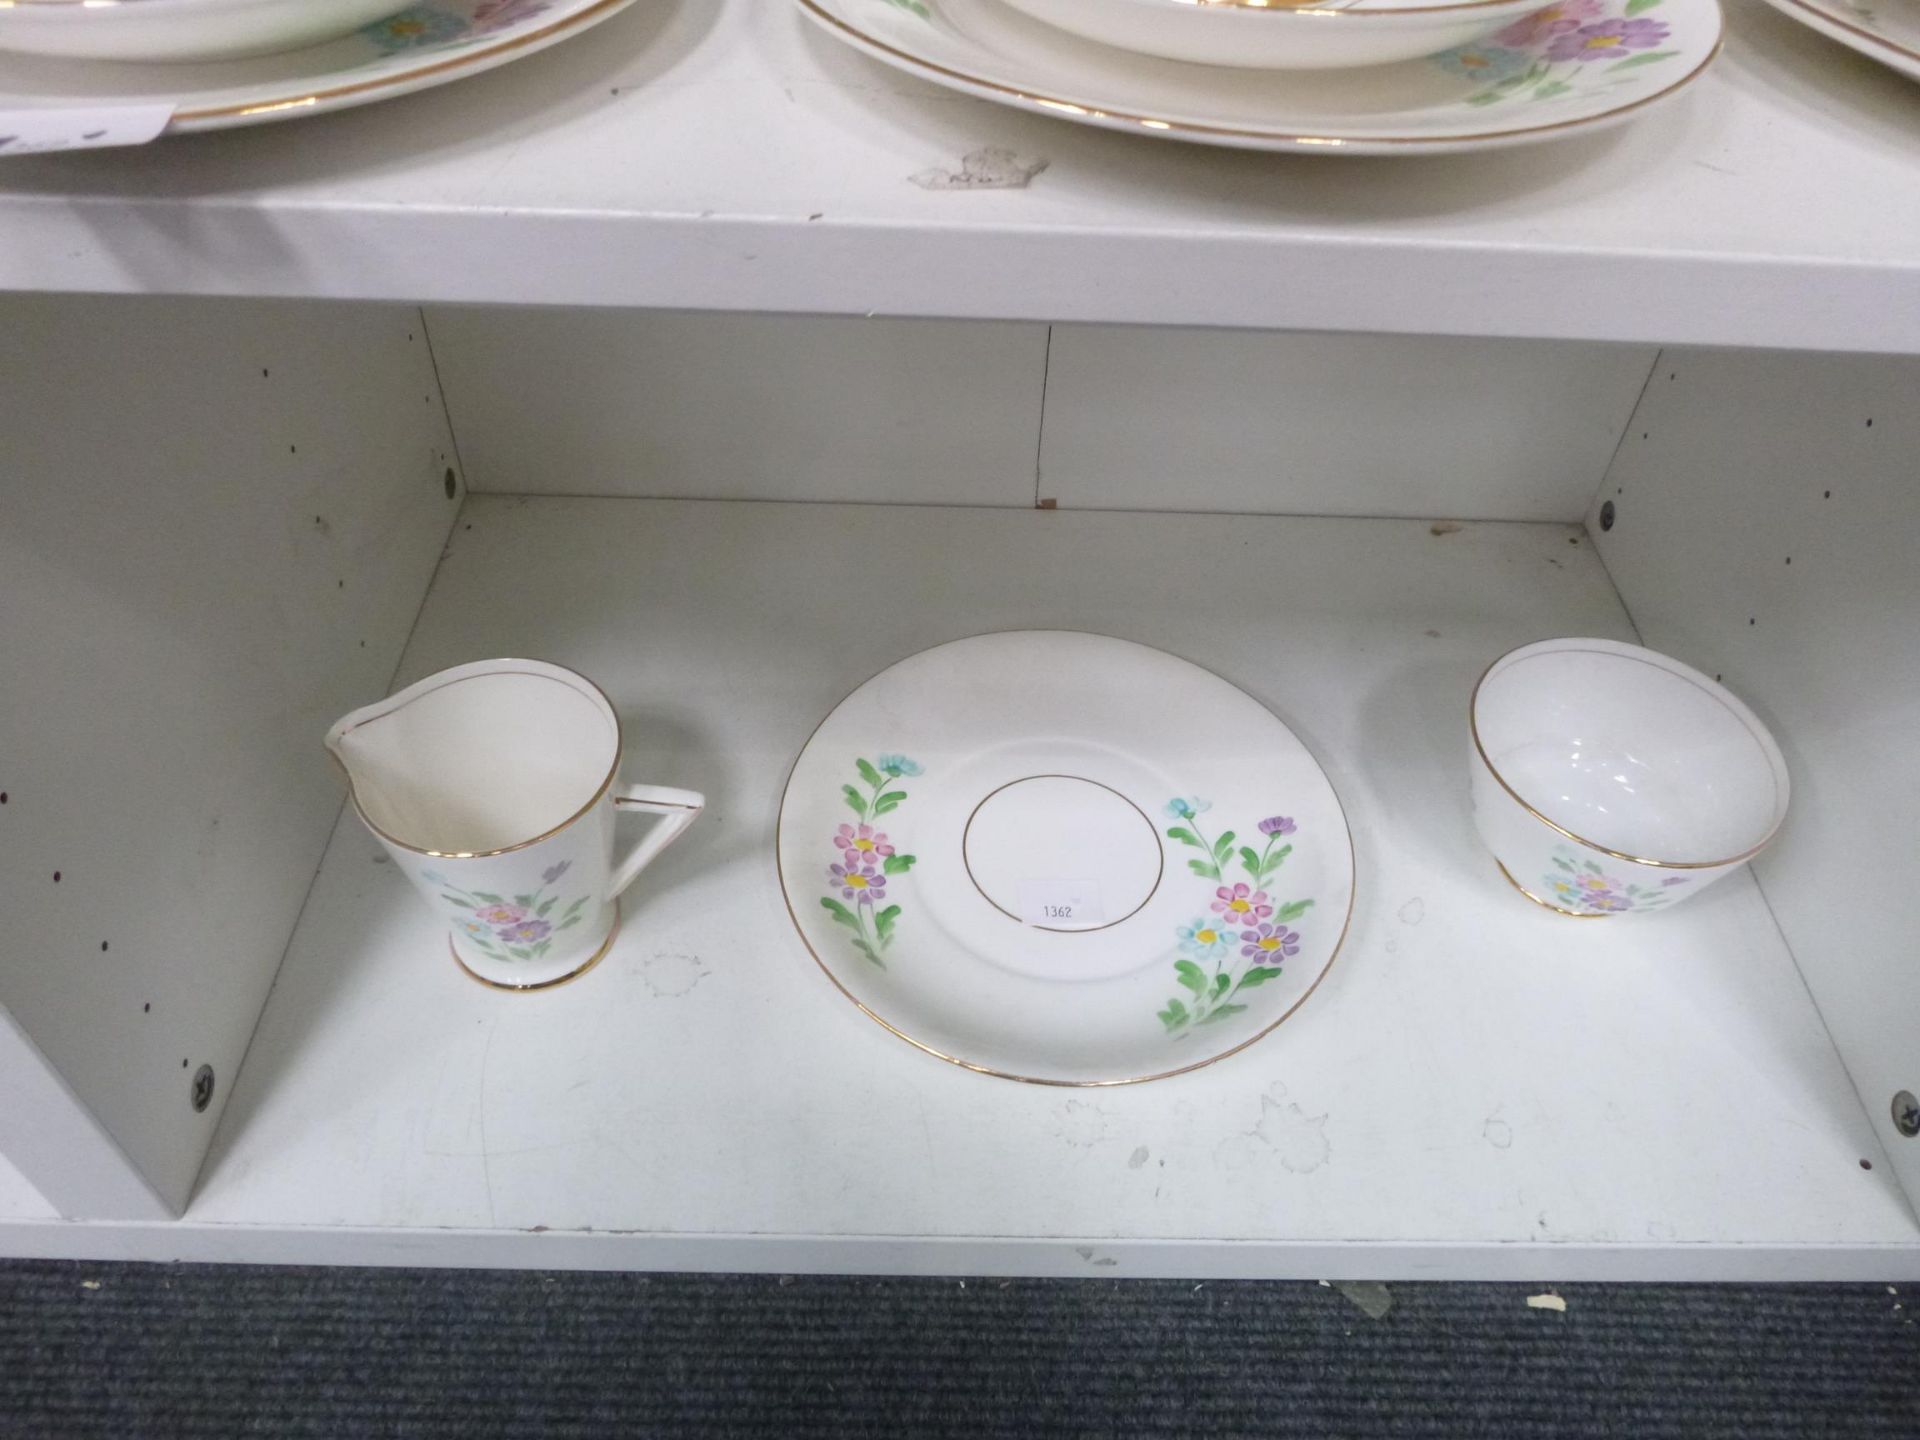 Two shelves to contain a Phoenix Bone China Tea Set with Tea Cups, Saucers etc (est £20-£40) - Image 3 of 3